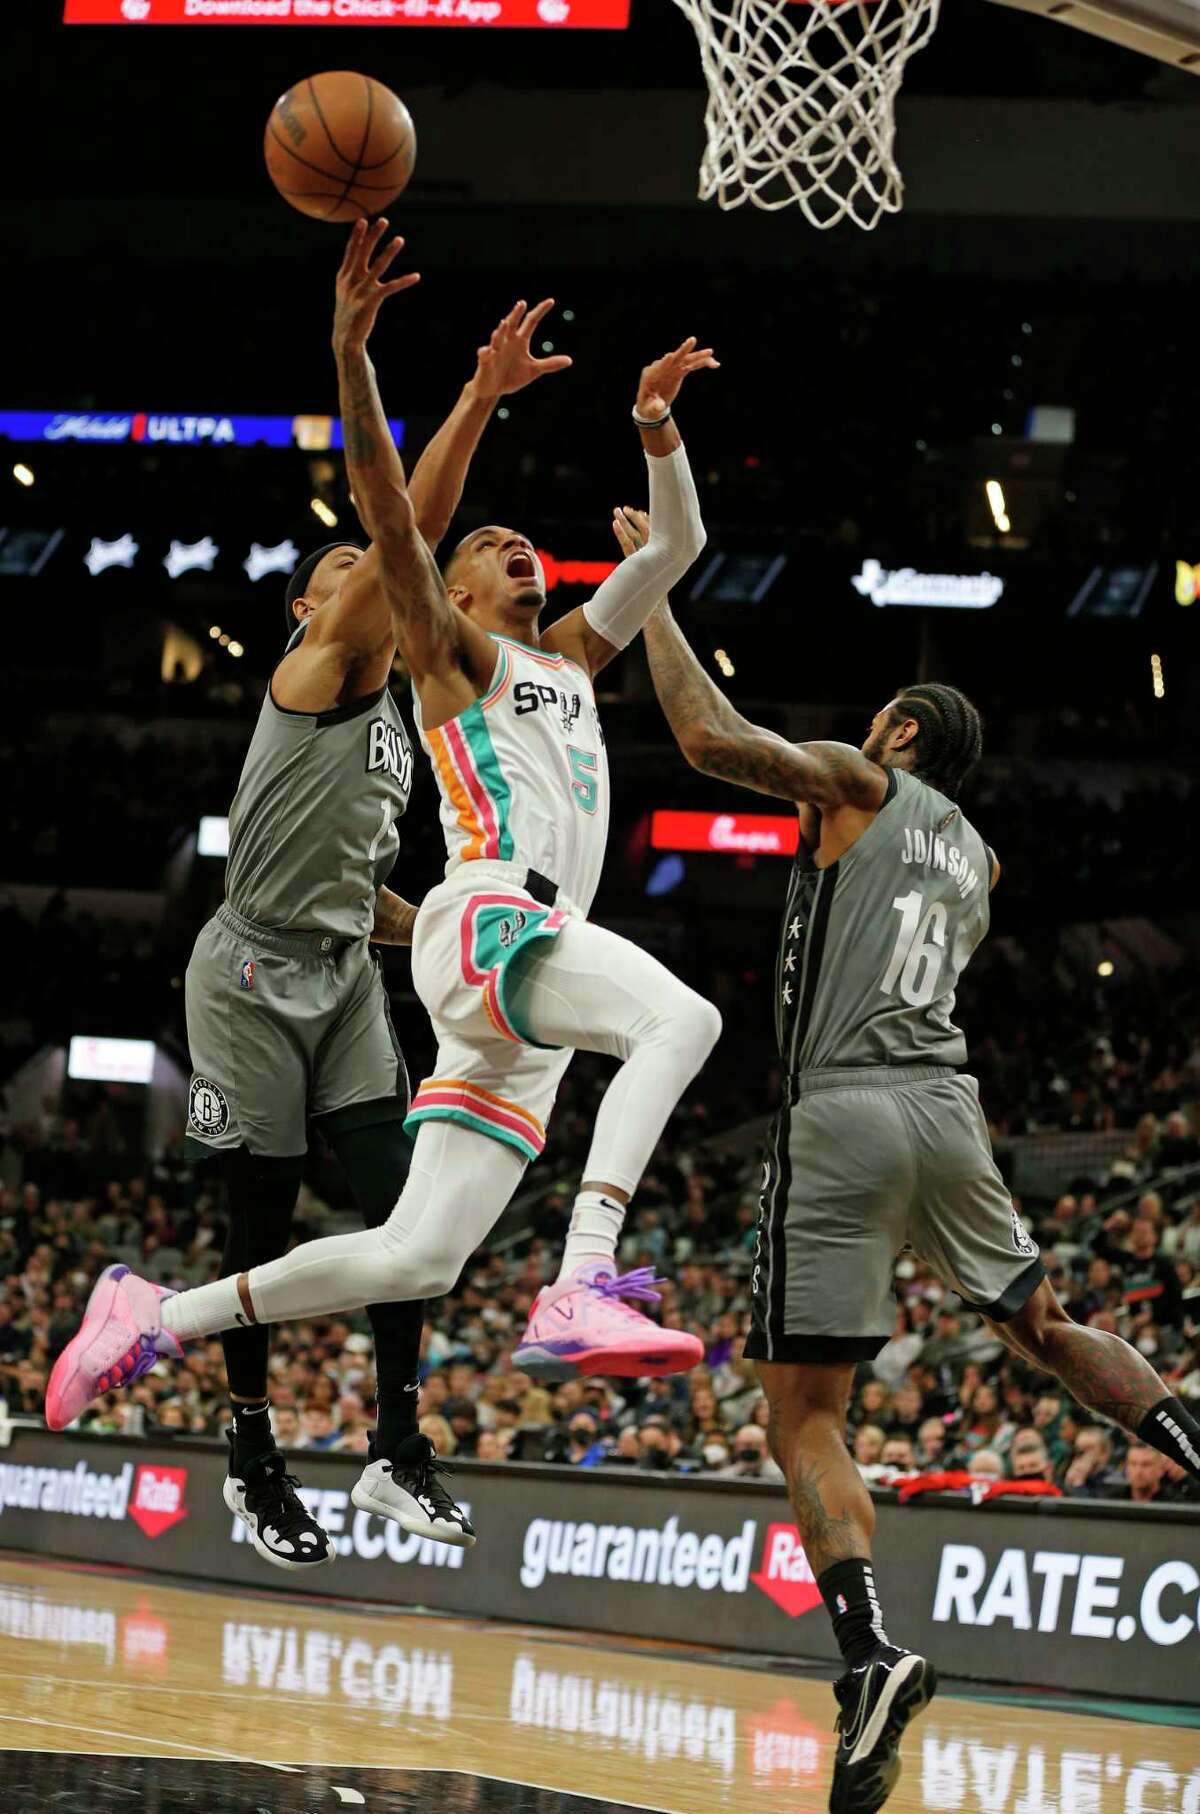 Dejounte Murray, center, had 25 points, 12 rebounds and 10 assists in Friday’s loss for his 13th career triple-double.